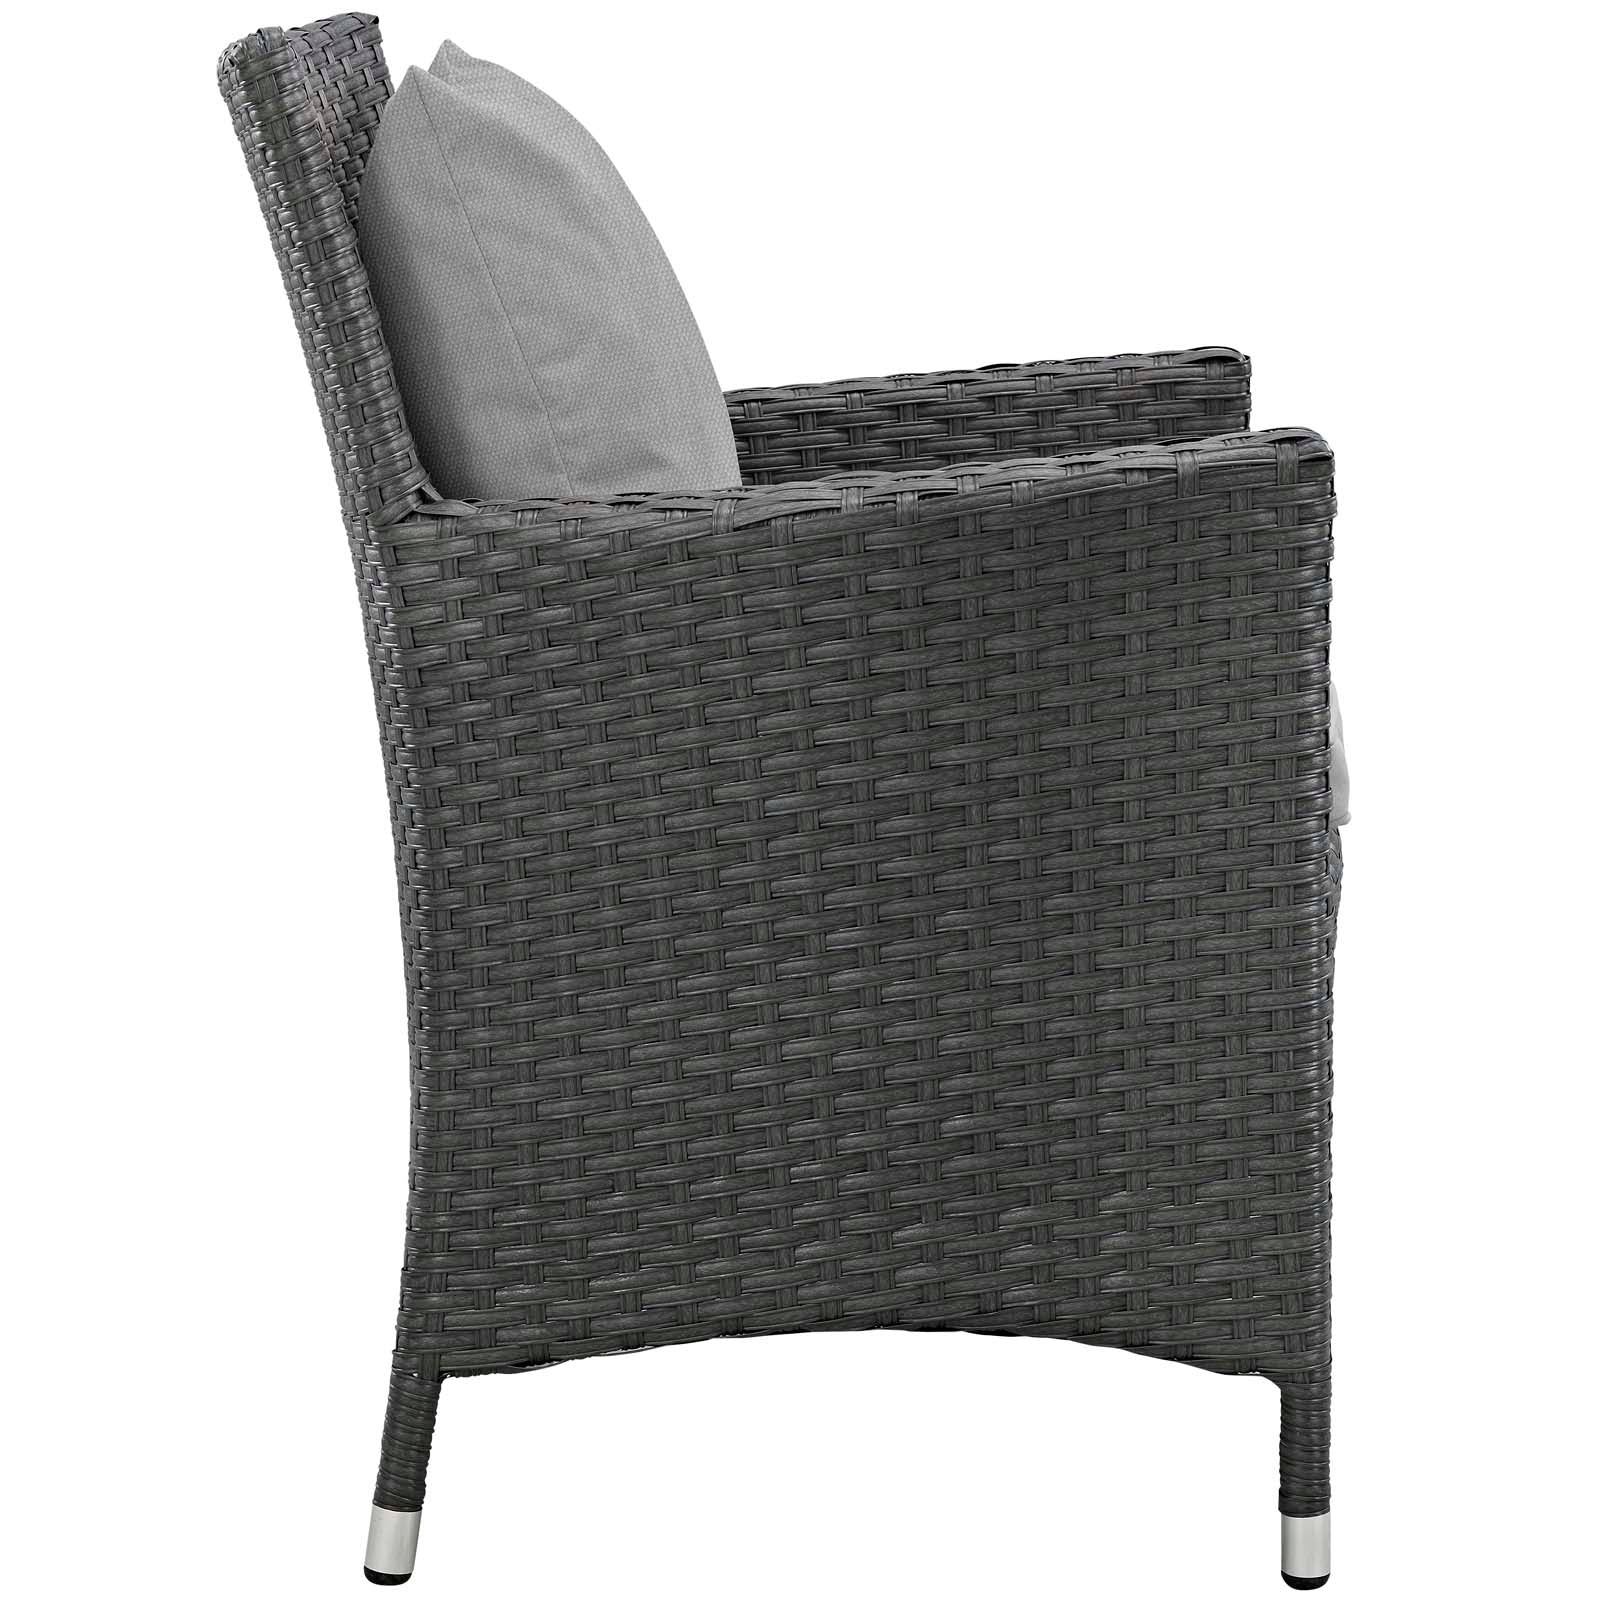 Modway Outdoor Dining Chairs - Sojourn Dining Outdoor Patio Sunbrella Armchair Canvas Gray